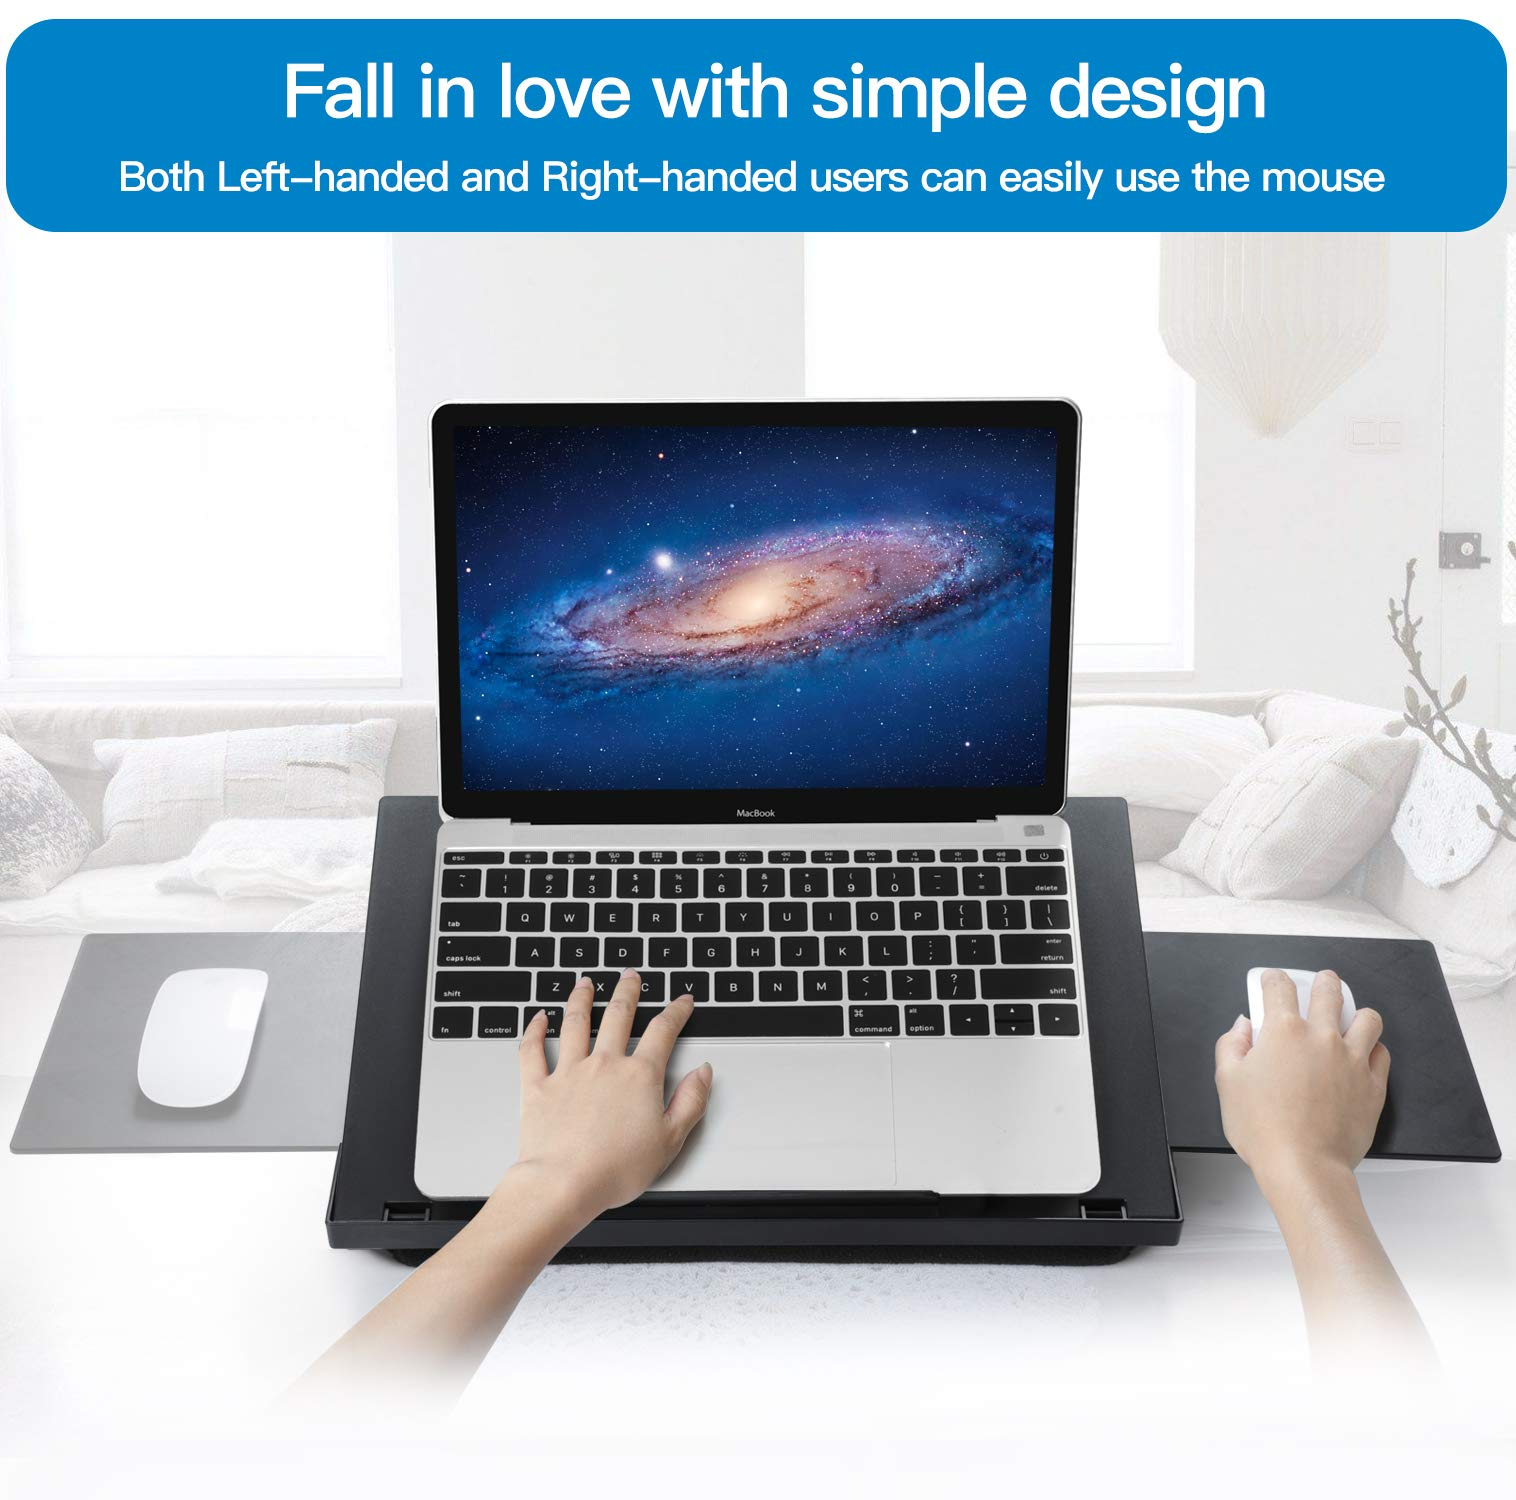 Adjustable Laptop Lap Desk Fits up to 15.6" with 6 Adjustable Angles, Detachable Mouse Pad, & Dual Cushions - image 6 of 8